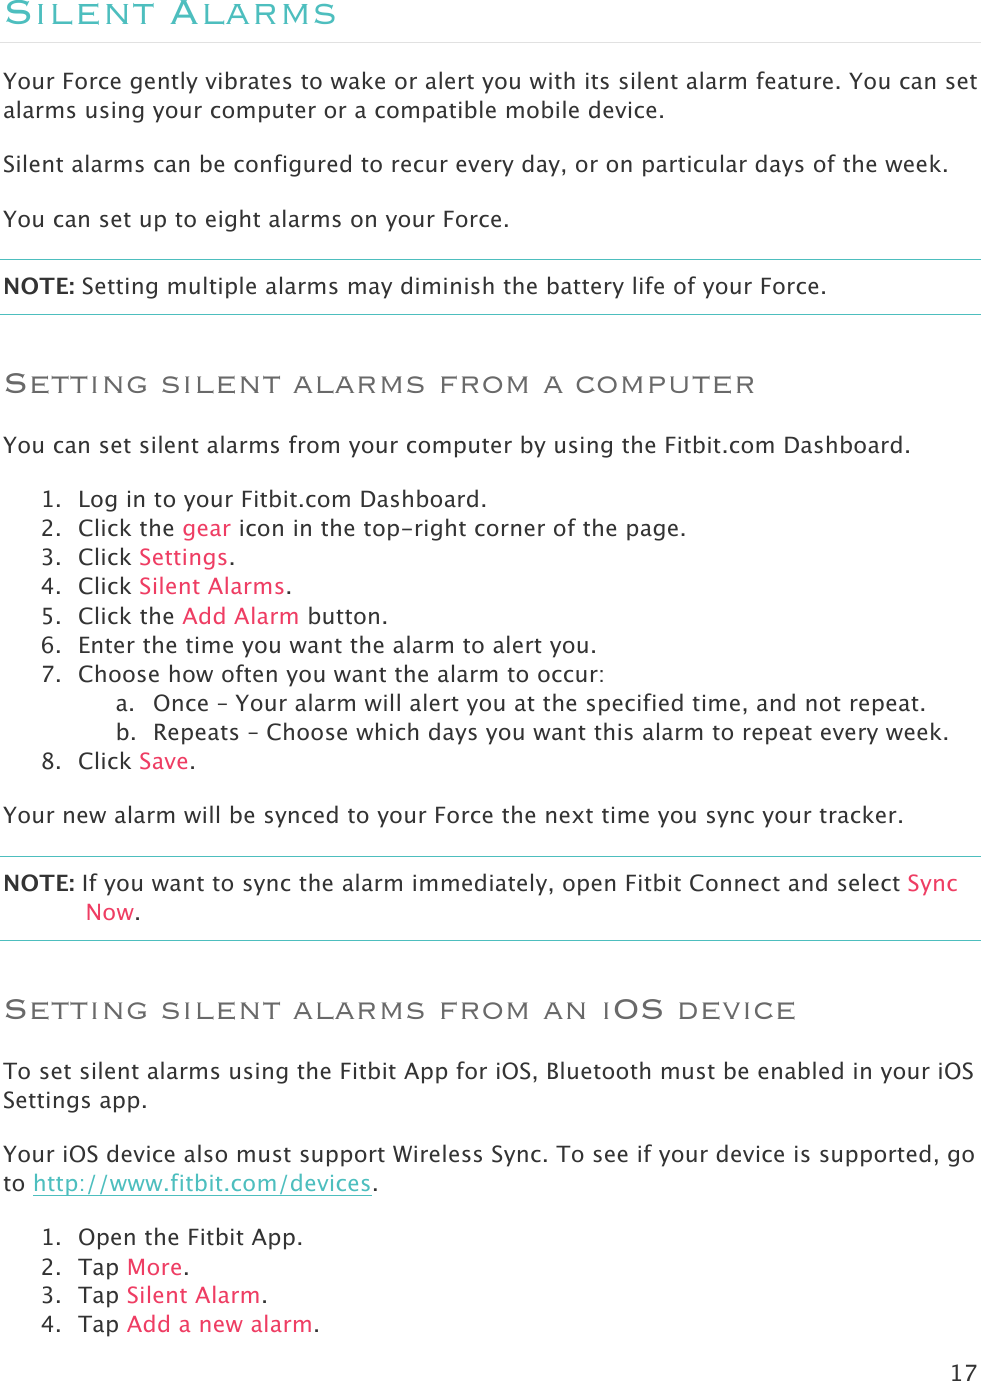 17  Silent Alarms Your Force gently vibrates to wake or alert you with its silent alarm feature. You can set alarms using your computer or a compatible mobile device.  Silent alarms can be configured to recur every day, or on particular days of the week. You can set up to eight alarms on your Force.  NOTE: Setting multiple alarms may diminish the battery life of your Force.  Setting silent alarms from a computer You can set silent alarms from your computer by using the Fitbit.com Dashboard.  1. Log in to your Fitbit.com Dashboard.  2. Click the gear icon in the top-right corner of the page.  3. Click Settings. 4. Click Silent Alarms. 5. Click the Add Alarm button.   6. Enter the time you want the alarm to alert you. 7. Choose how often you want the alarm to occur: a. Once – Your alarm will alert you at the specified time, and not repeat. b. Repeats – Choose which days you want this alarm to repeat every week. 8. Click Save. Your new alarm will be synced to your Force the next time you sync your tracker.  NOTE: If you want to sync the alarm immediately, open Fitbit Connect and select Sync Now. Setting silent alarms from an iOS device To set silent alarms using the Fitbit App for iOS, Bluetooth must be enabled in your iOS Settings app. Your iOS device also must support Wireless Sync. To see if your device is supported, go to http://www.fitbit.com/devices.  1. Open the Fitbit App. 2. Tap More.  3. Tap Silent Alarm. 4. Tap Add a new alarm.  